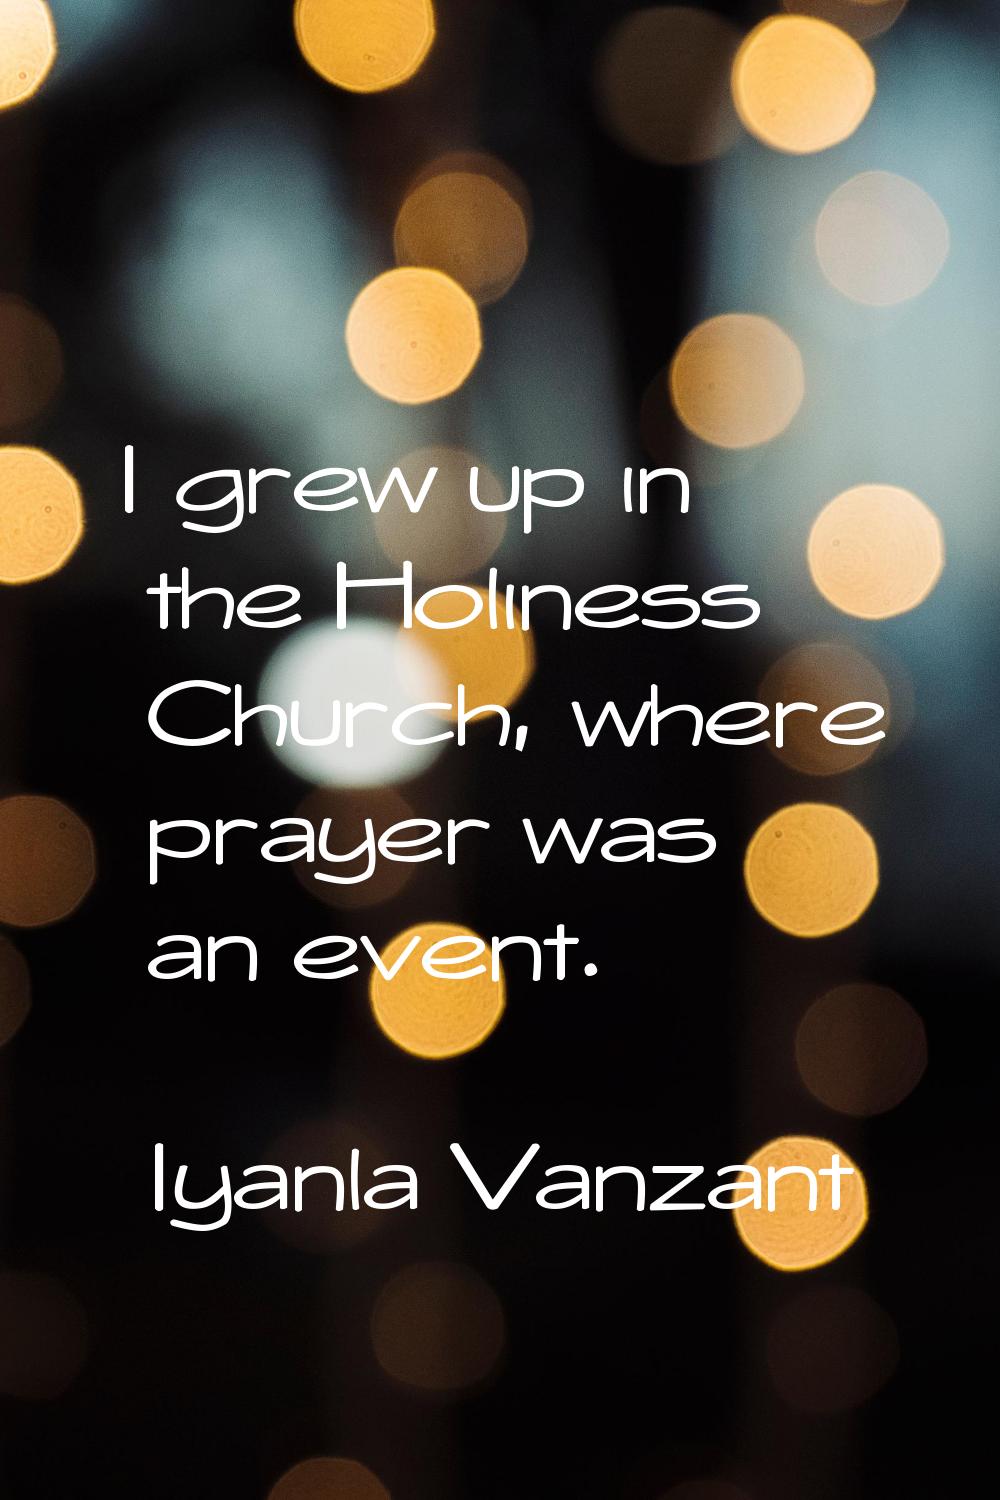 I grew up in the Holiness Church, where prayer was an event.